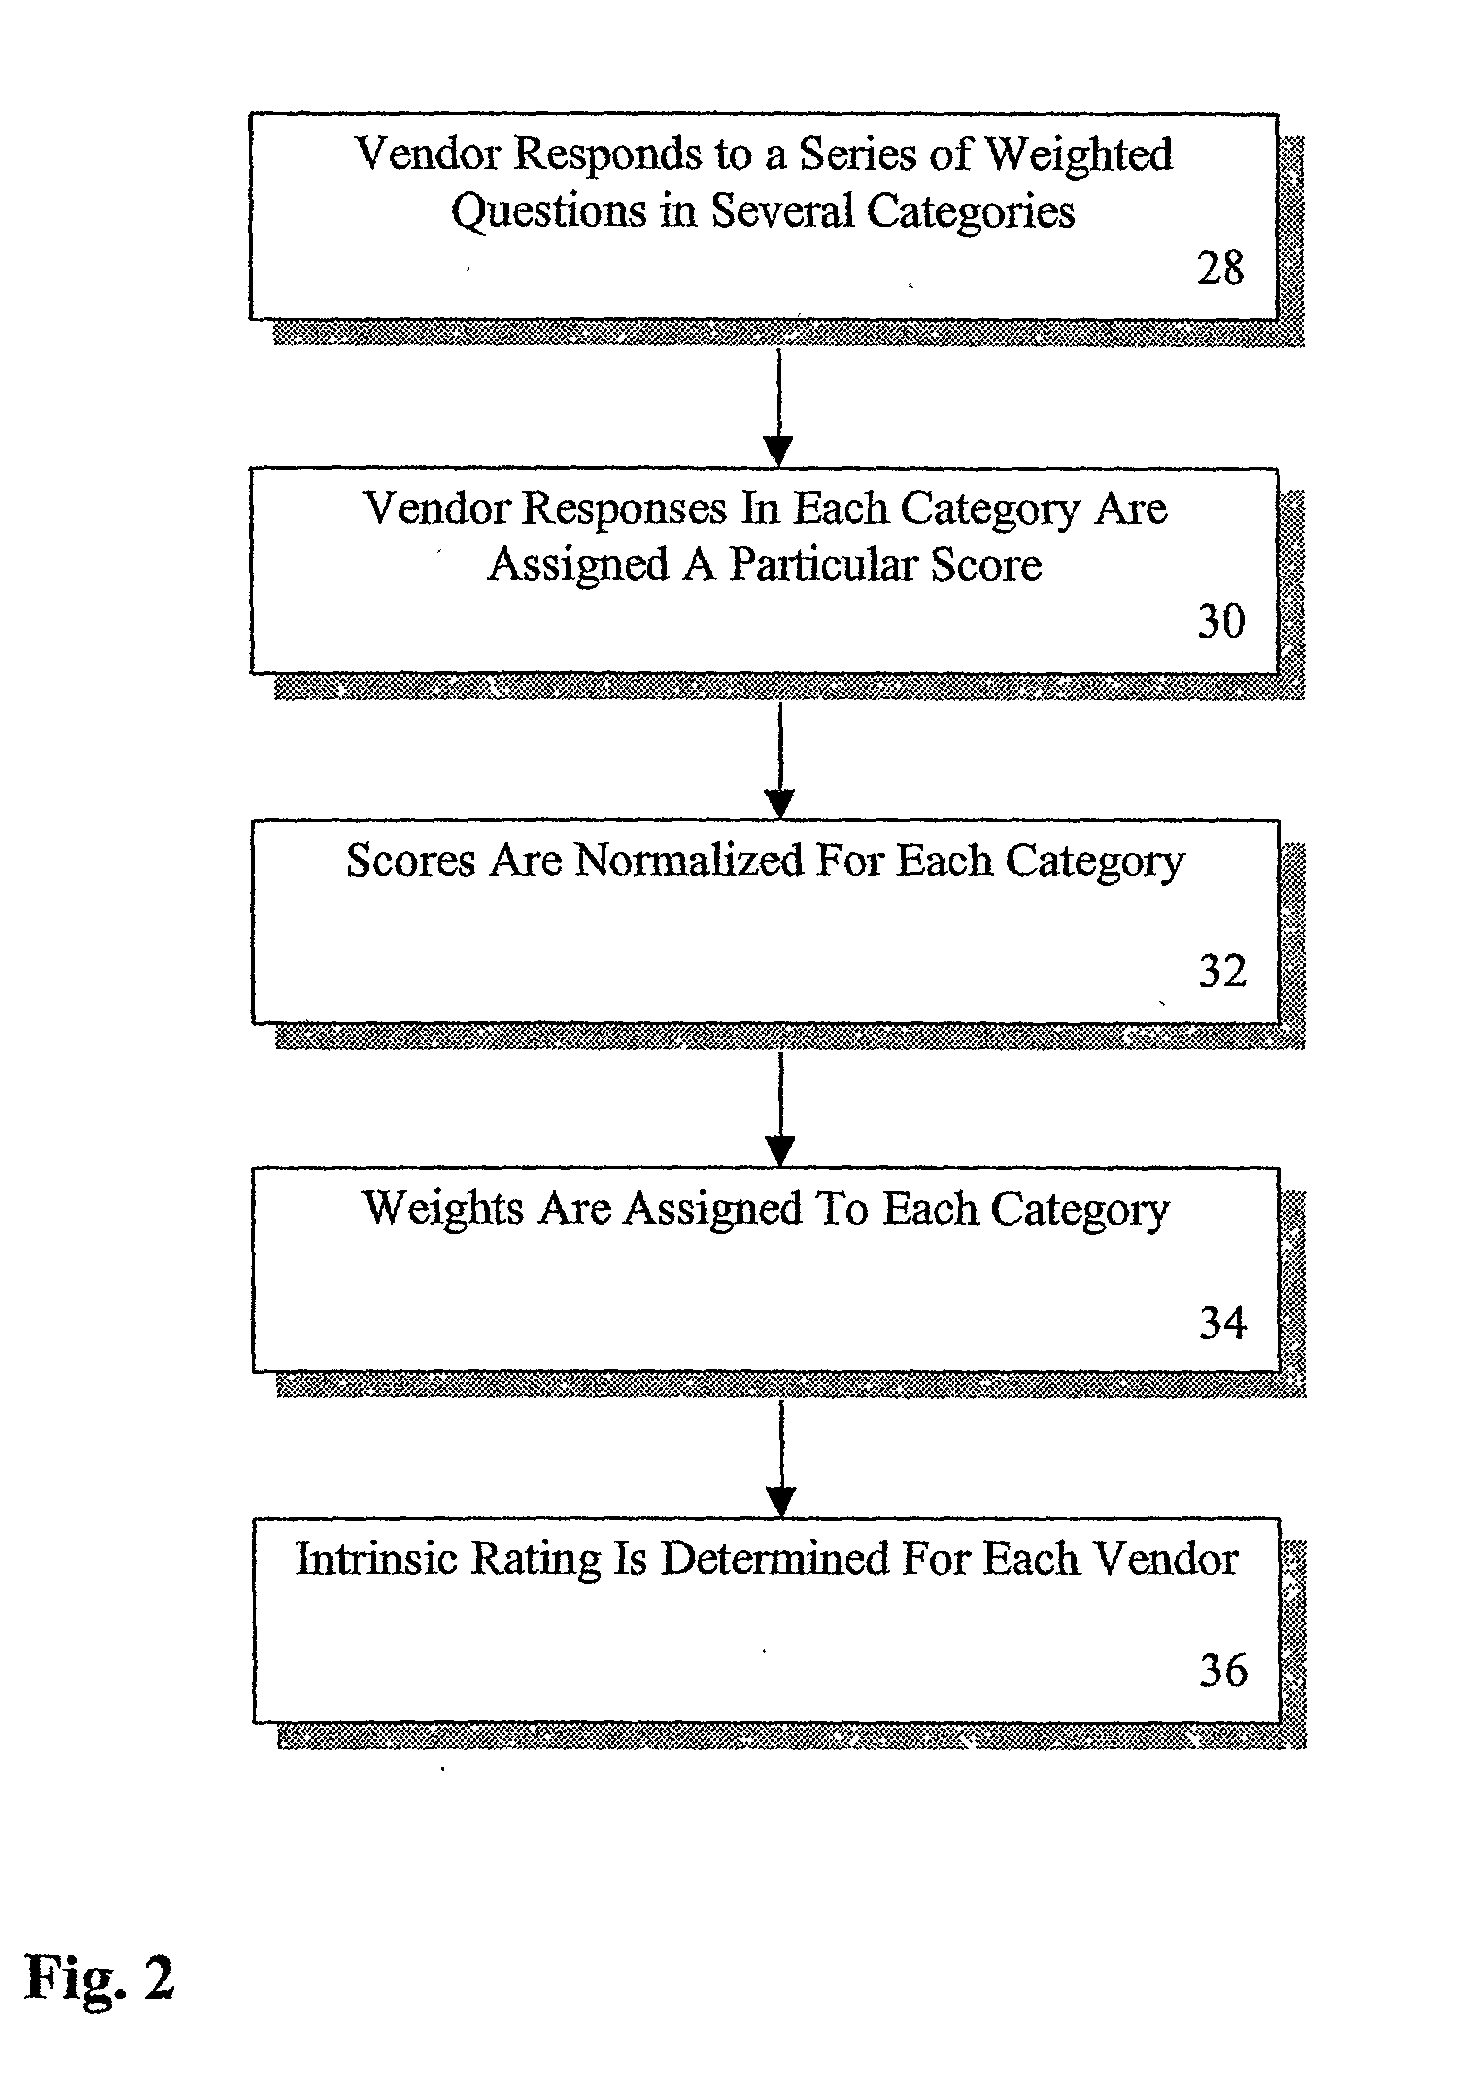 System and method of assessing and rating vendor risk and pricing of technology delivery insurance